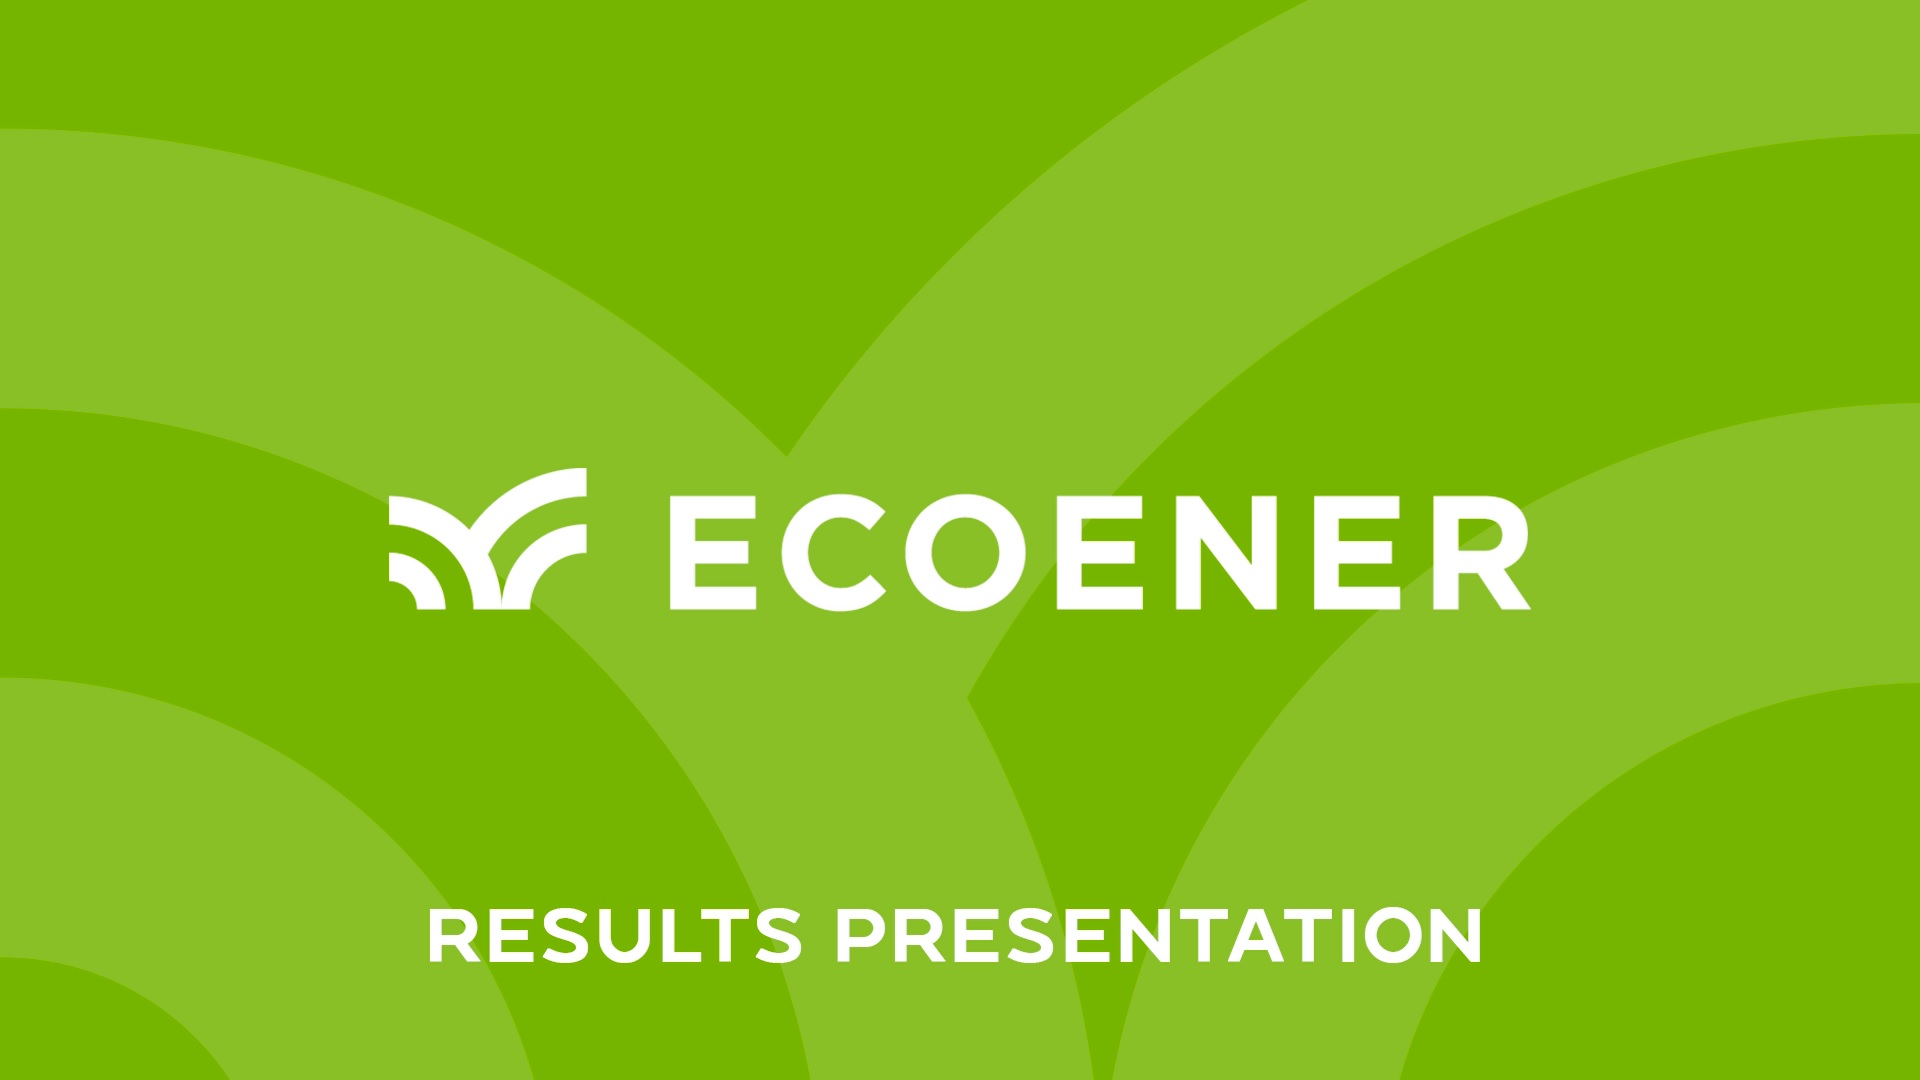 Ecoener posts ebitda and operating cash flow growth and strengthens asset portfolio